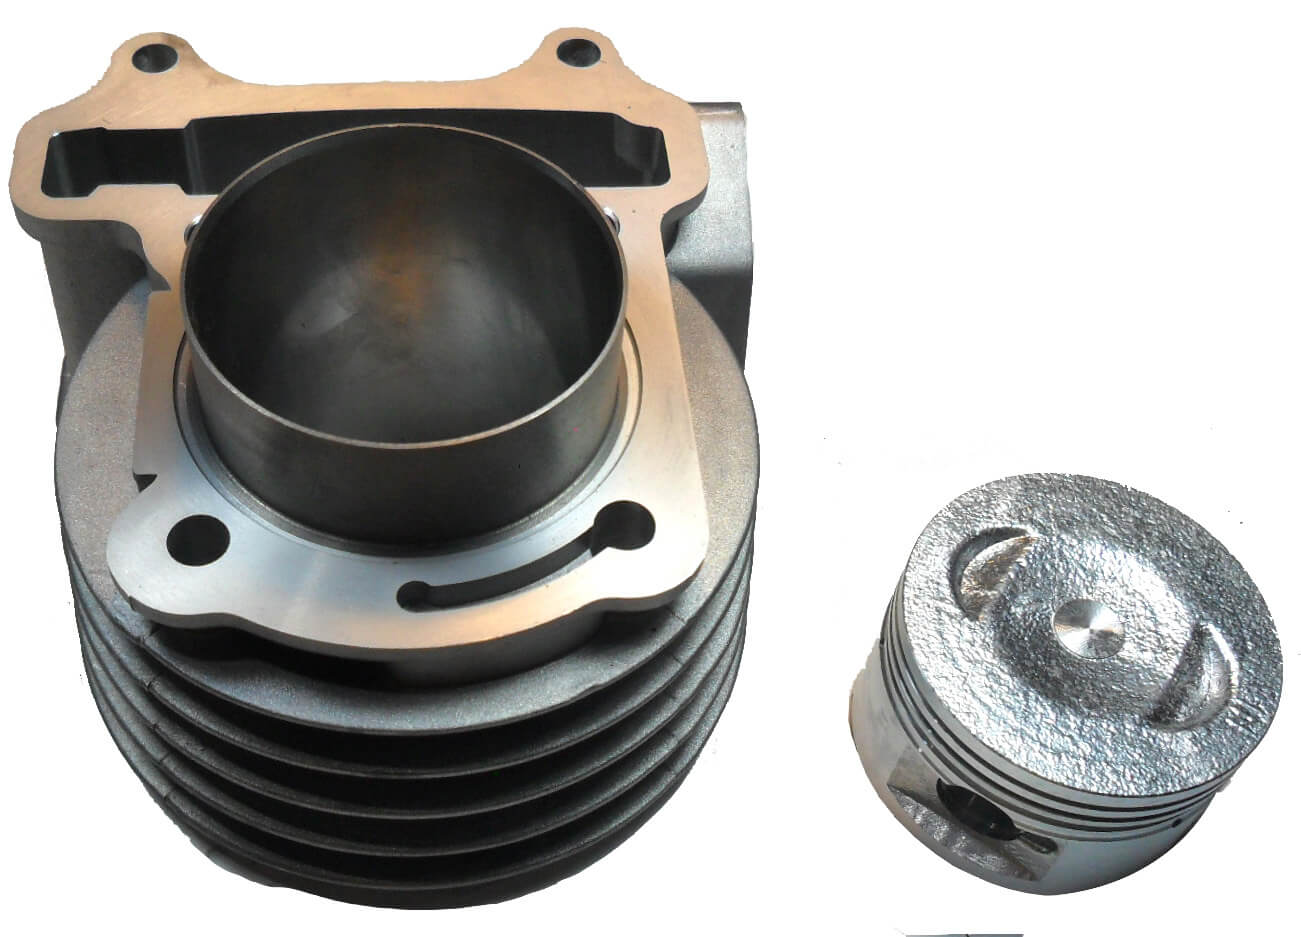 100cc Cylinder Piston Top End Kit With Non-EGR Head For GY6-50 QMB139 Chinese Scooter Motors. Bore=50mm Shirt OD=52.50mm